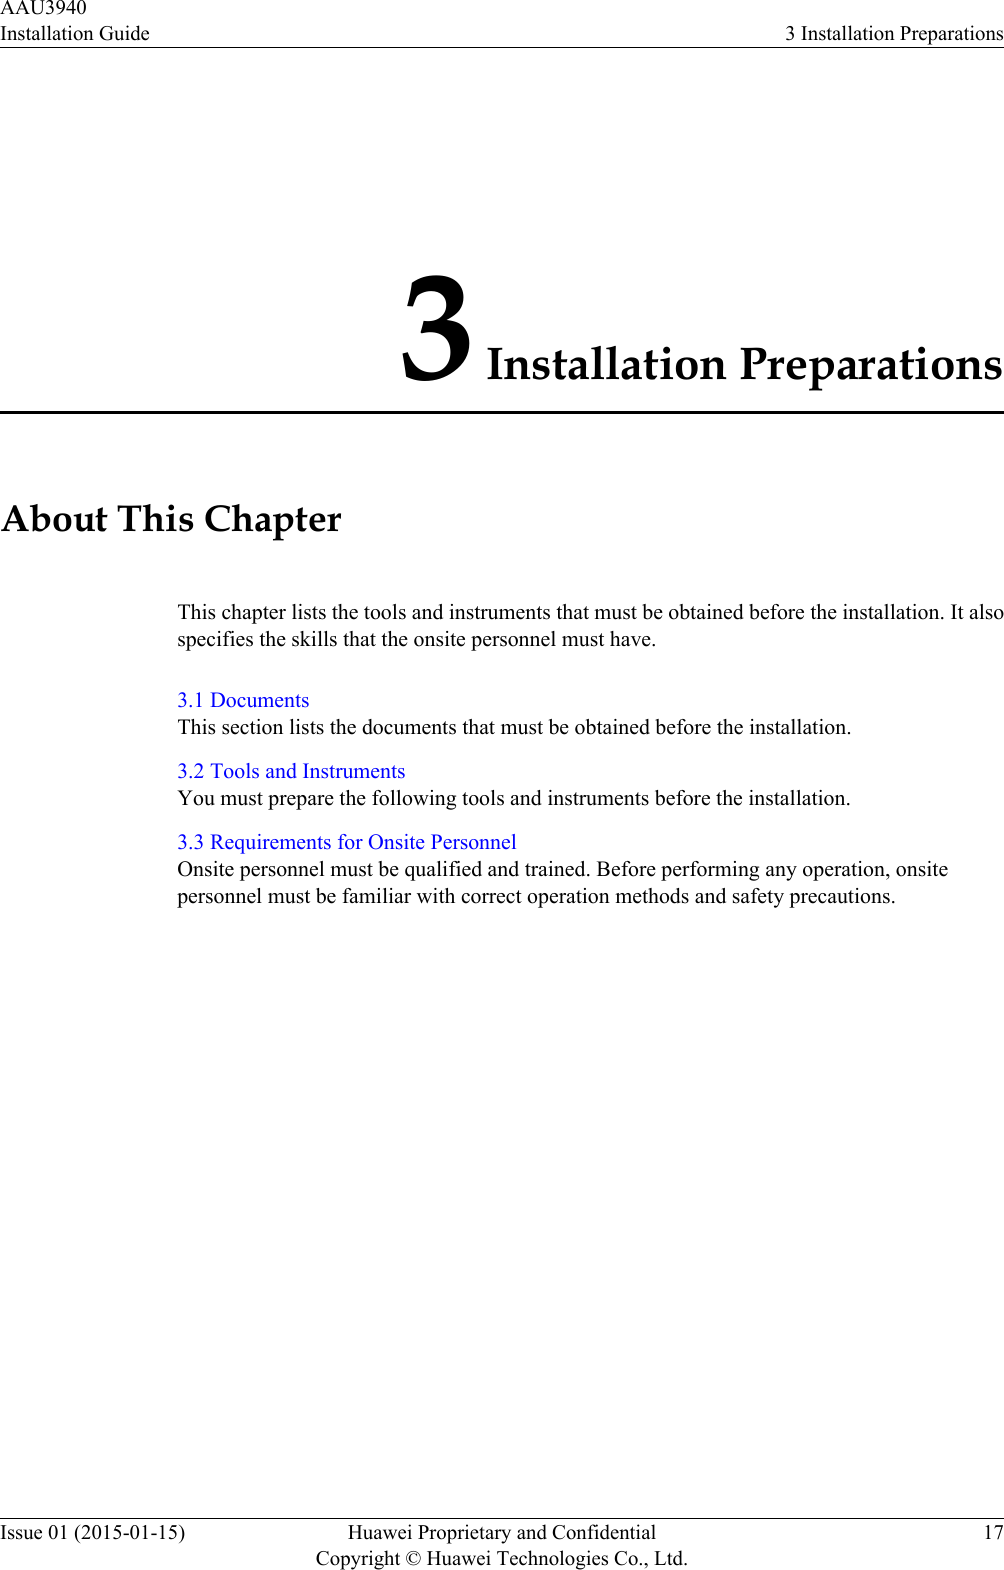 3 Installation PreparationsAbout This ChapterThis chapter lists the tools and instruments that must be obtained before the installation. It alsospecifies the skills that the onsite personnel must have.3.1 DocumentsThis section lists the documents that must be obtained before the installation.3.2 Tools and InstrumentsYou must prepare the following tools and instruments before the installation.3.3 Requirements for Onsite PersonnelOnsite personnel must be qualified and trained. Before performing any operation, onsitepersonnel must be familiar with correct operation methods and safety precautions.AAU3940Installation Guide 3 Installation PreparationsIssue 01 (2015-01-15) Huawei Proprietary and ConfidentialCopyright © Huawei Technologies Co., Ltd.17